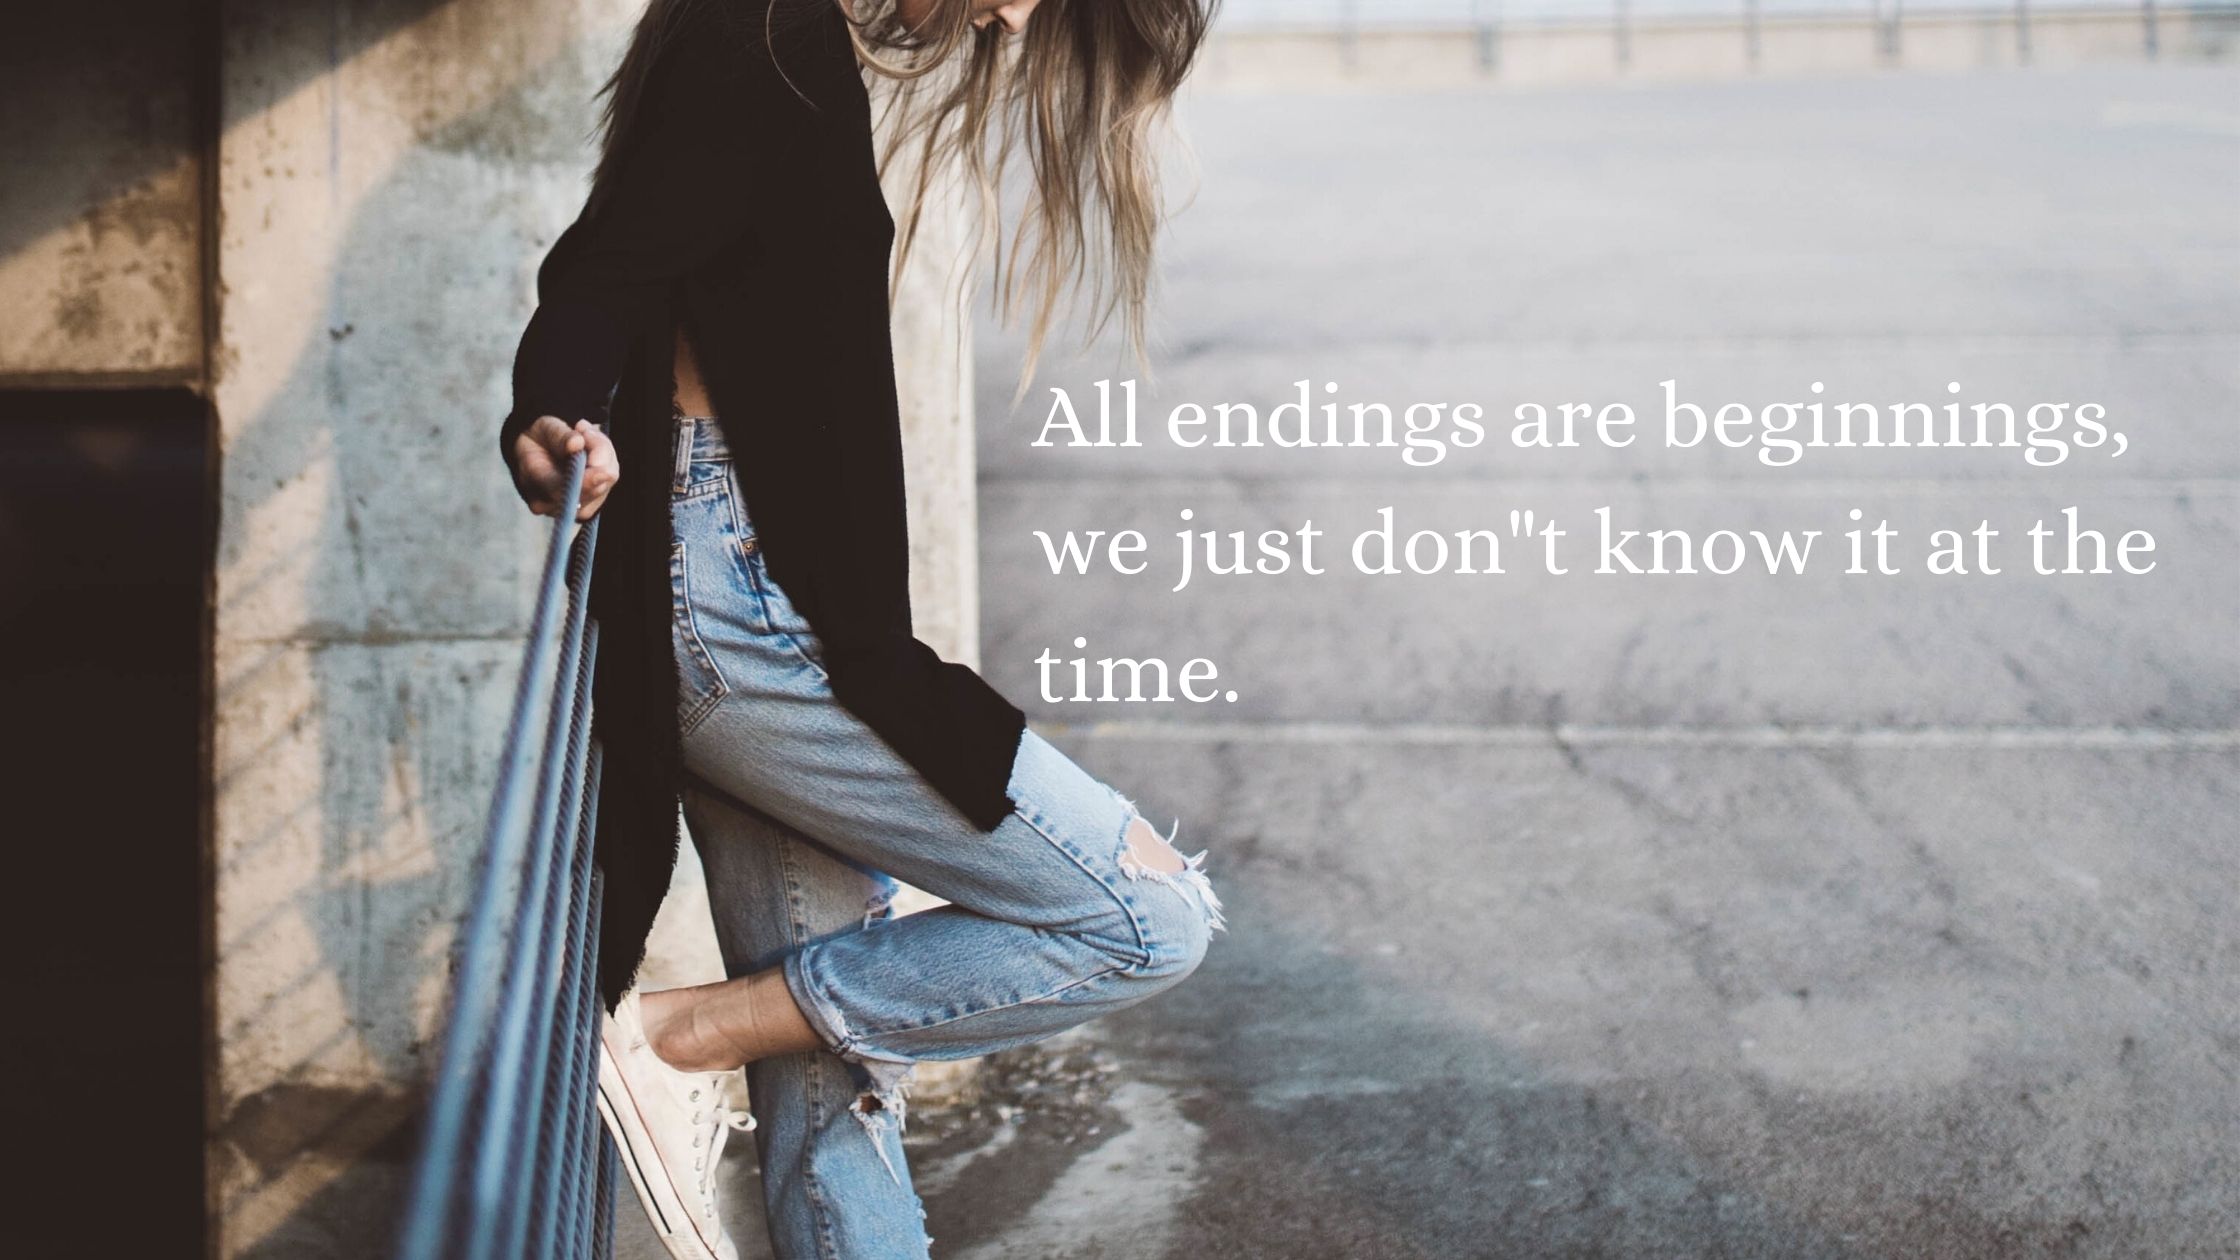 All endings are beginnings, we just don"t know it at the time.